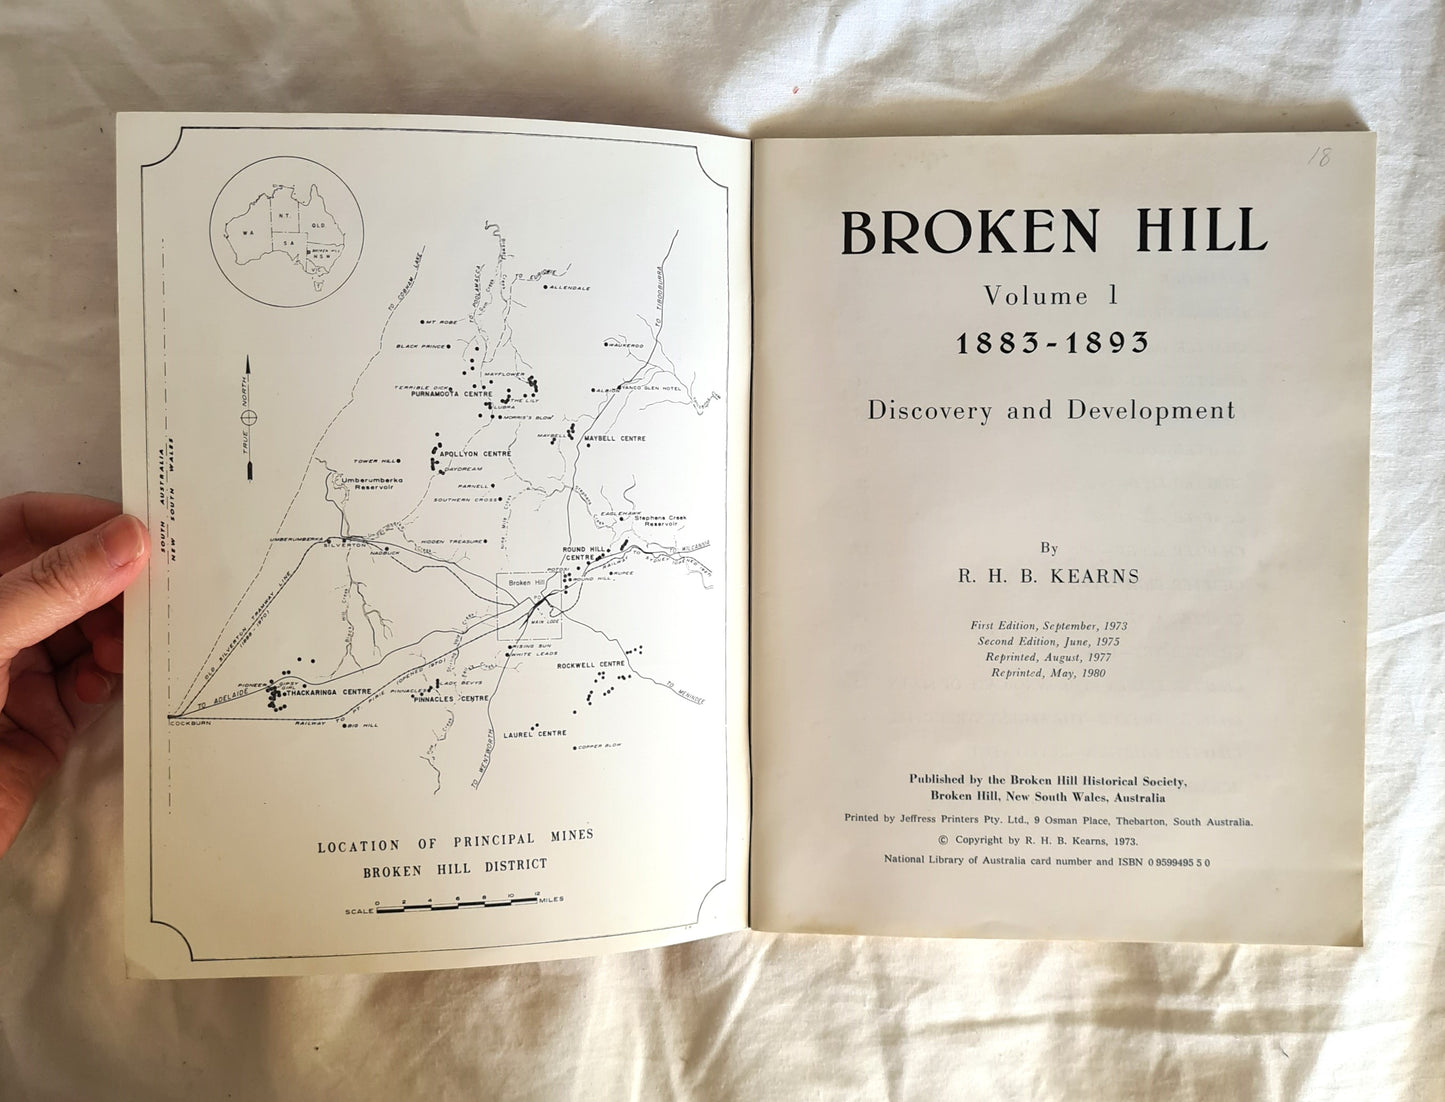 Broken Hill  Volume 1 1883-1893  Discovery and Development  by R. H. B. Kearns